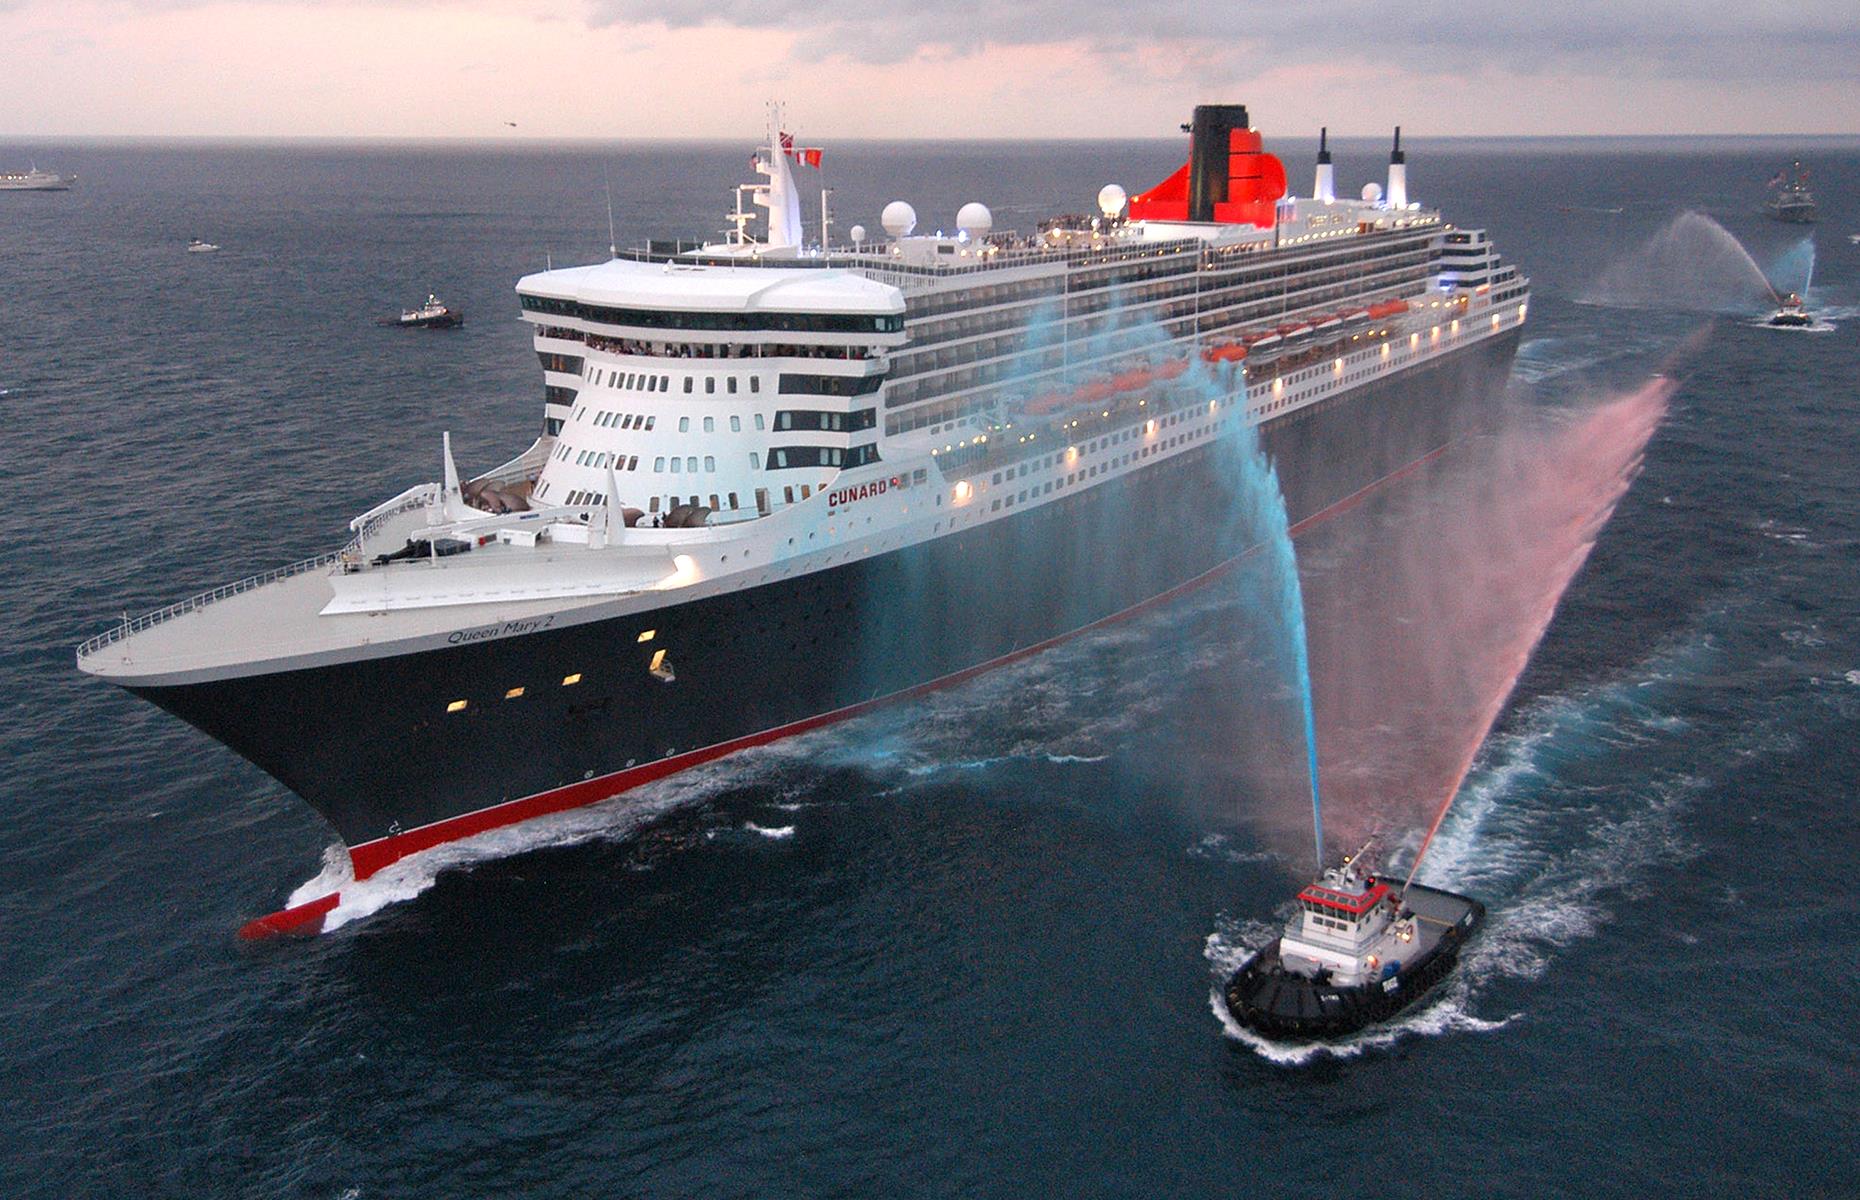 <p>The 2000s saw larger-than-life, no-expense-spared, mega cruise ships sail onto the scene. This sunset snap shows Cunard Line's Queen Mary II as she completes her first trans-Atlantic voyage in January 2004. At this time, she was the largest and most expensive cruise ship ever constructed with room for 2,200-plus passengers, a theater and even a planetarium, setting the bar for the ships of posterity. </p>